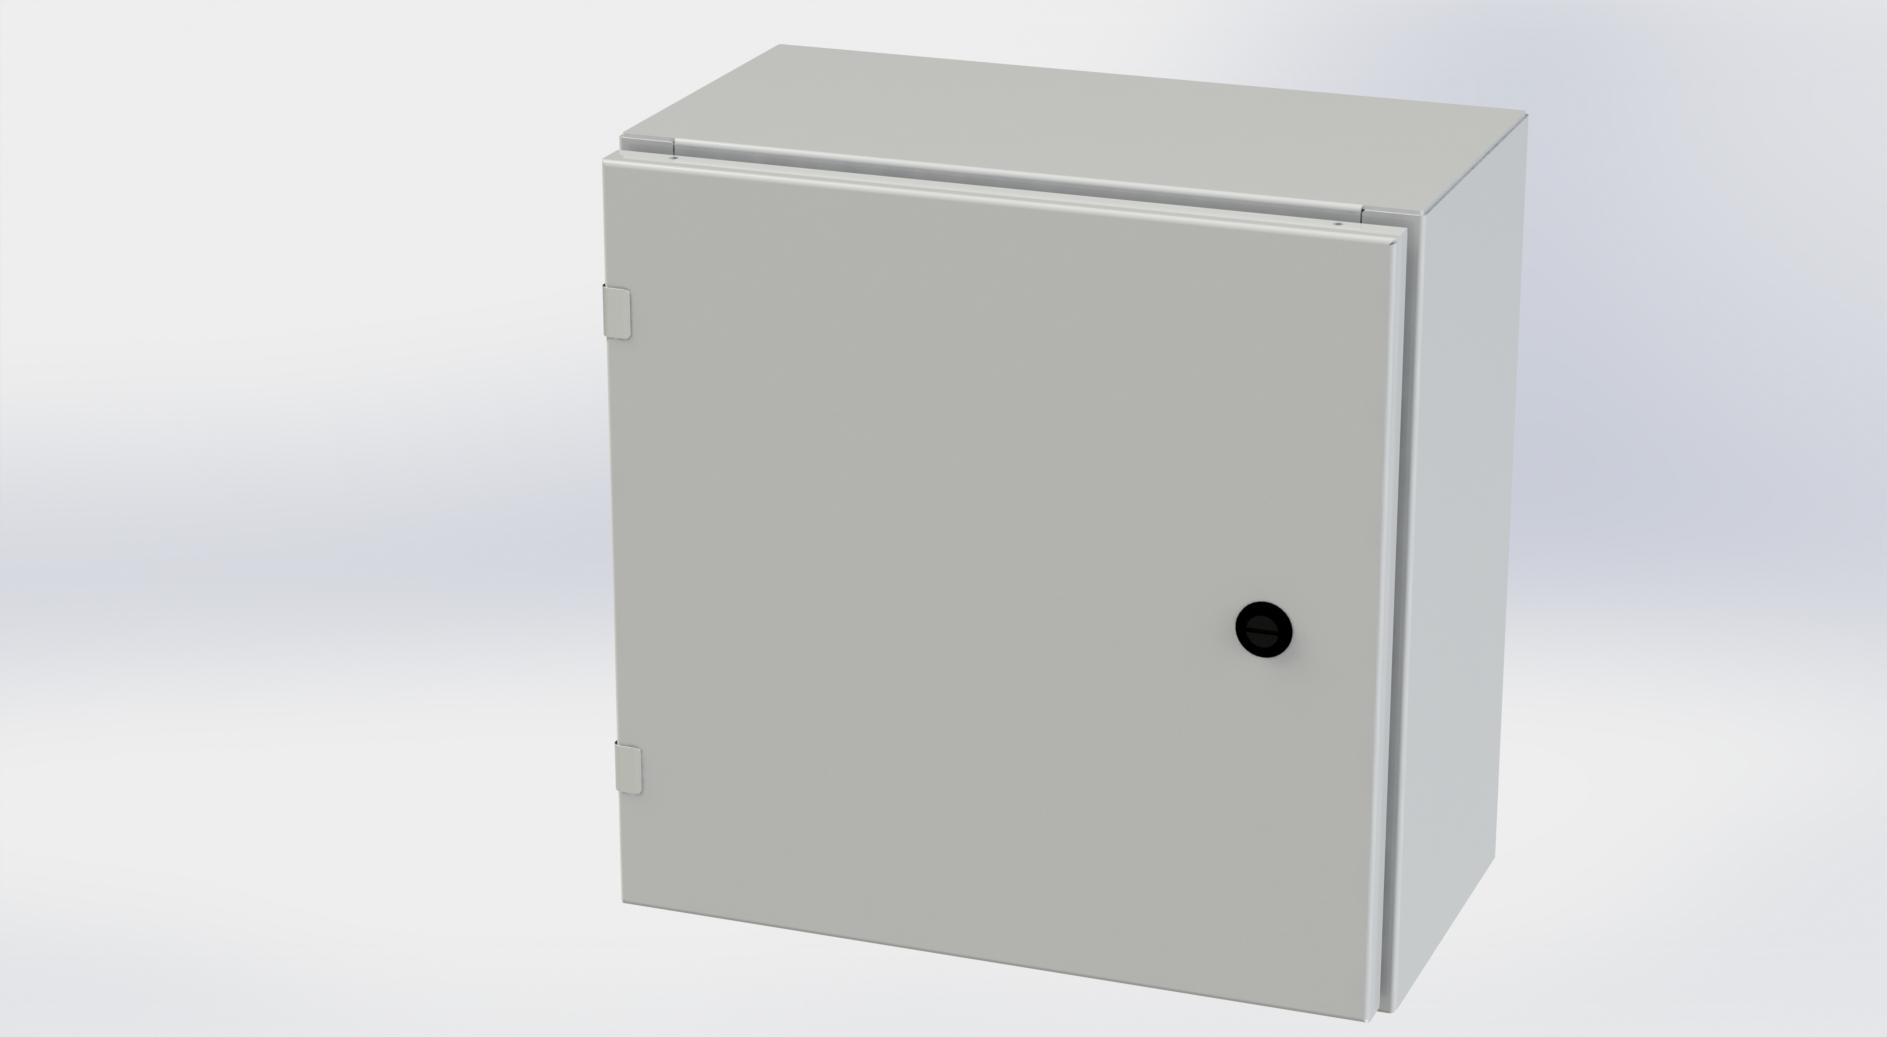 Saginaw Control SCE-16EL1608LPLG EL Enclosure, Height:16.00", Width:16.00", Depth:8.00", RAL 7035 gray powder coating inside and out. Optional sub-panels are powder coated white.